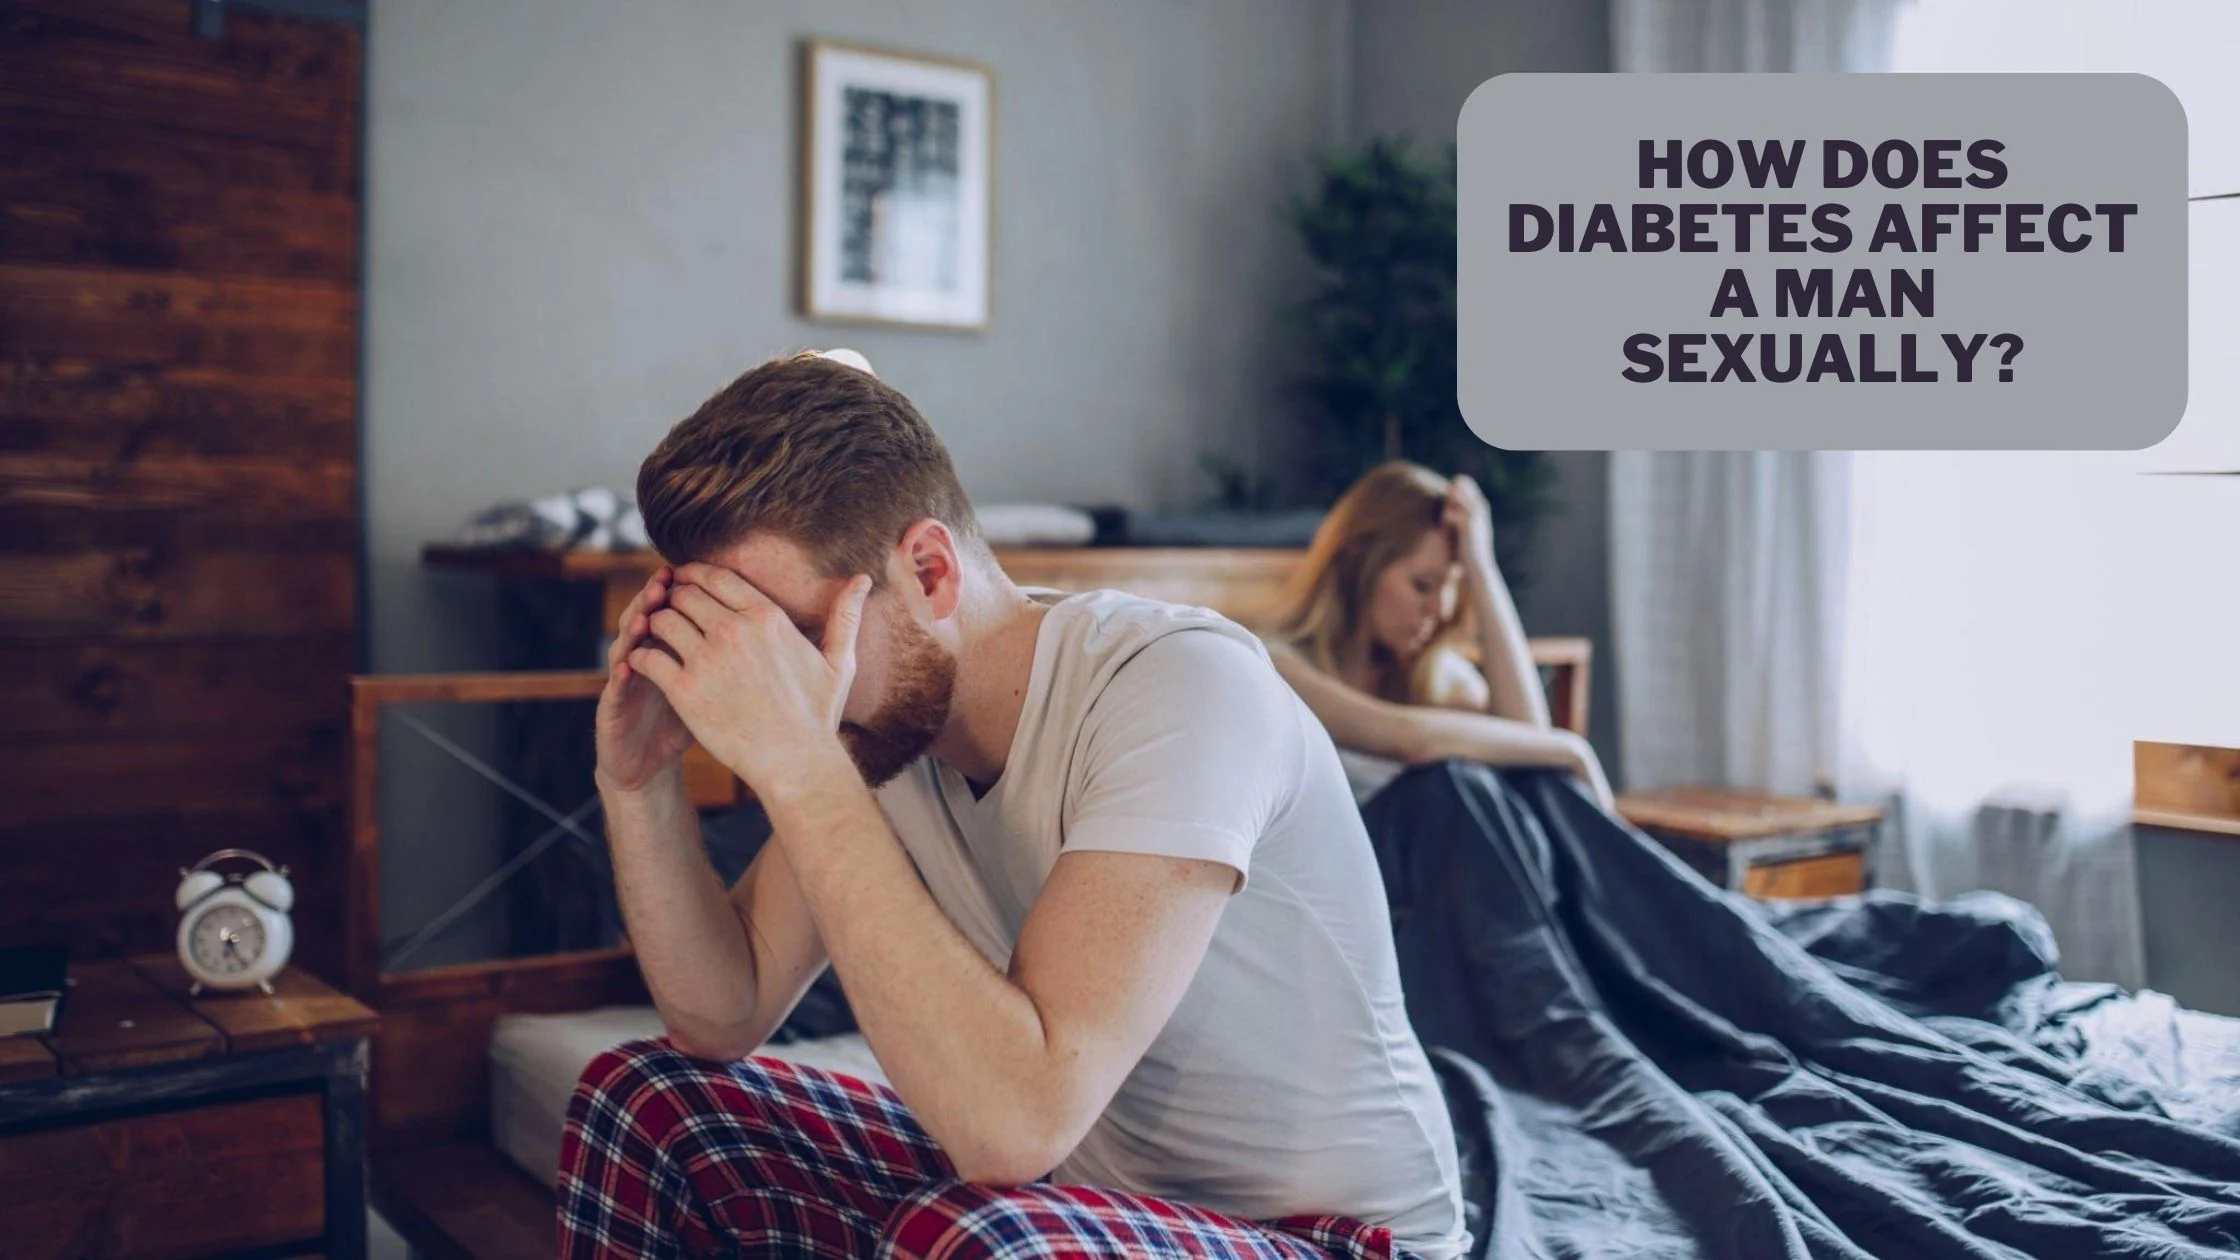 How Does Diabetes Affect A Man Sexually